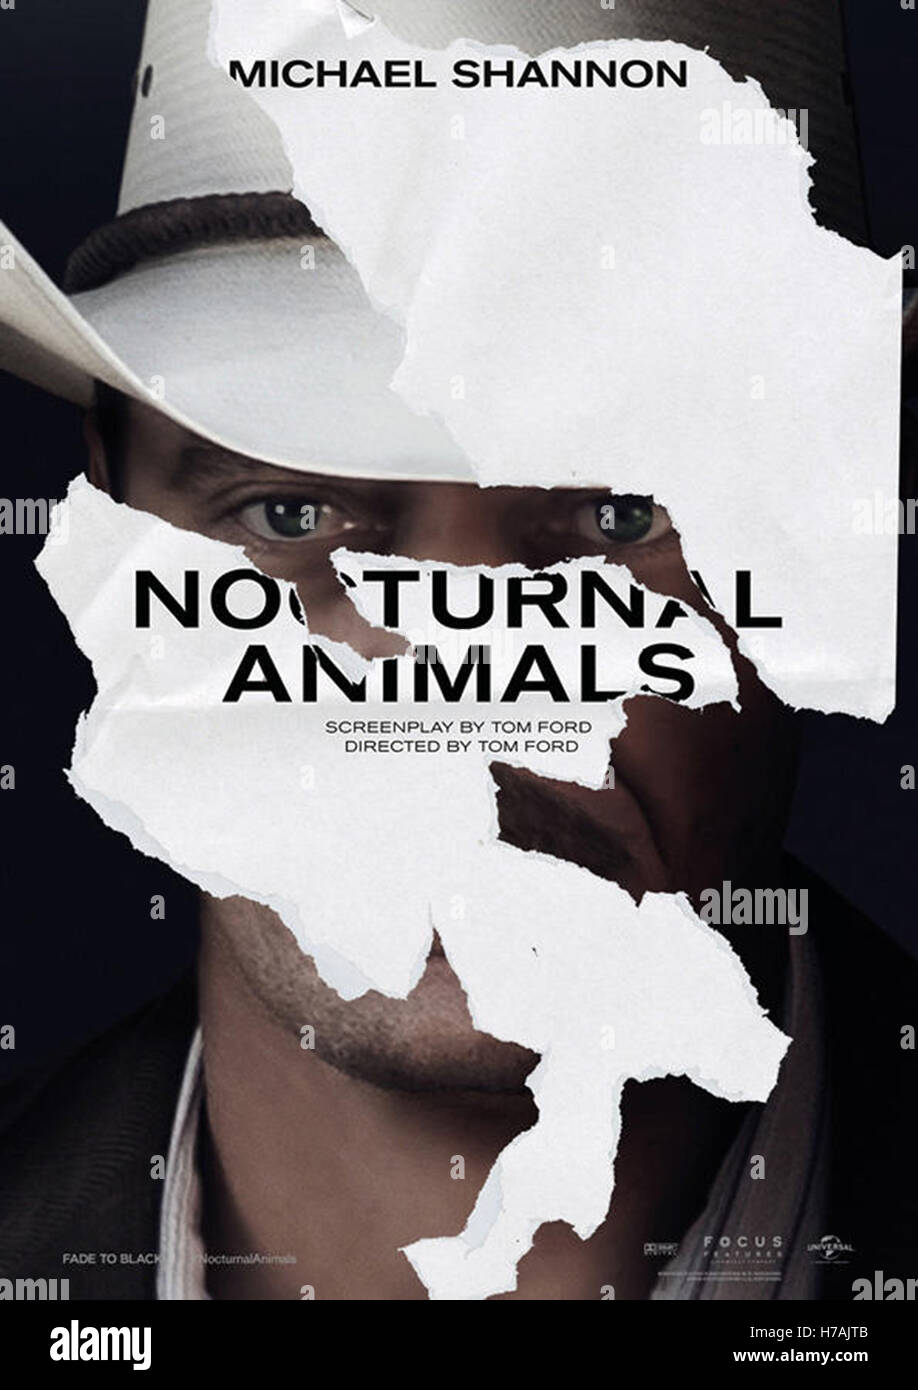 NOCTURNAL ANIMALS (DIR)  MICHAEL SHANNON  TOM FORD (DIR)  MOVIESTORE COLLECTION LTD Stock Photo